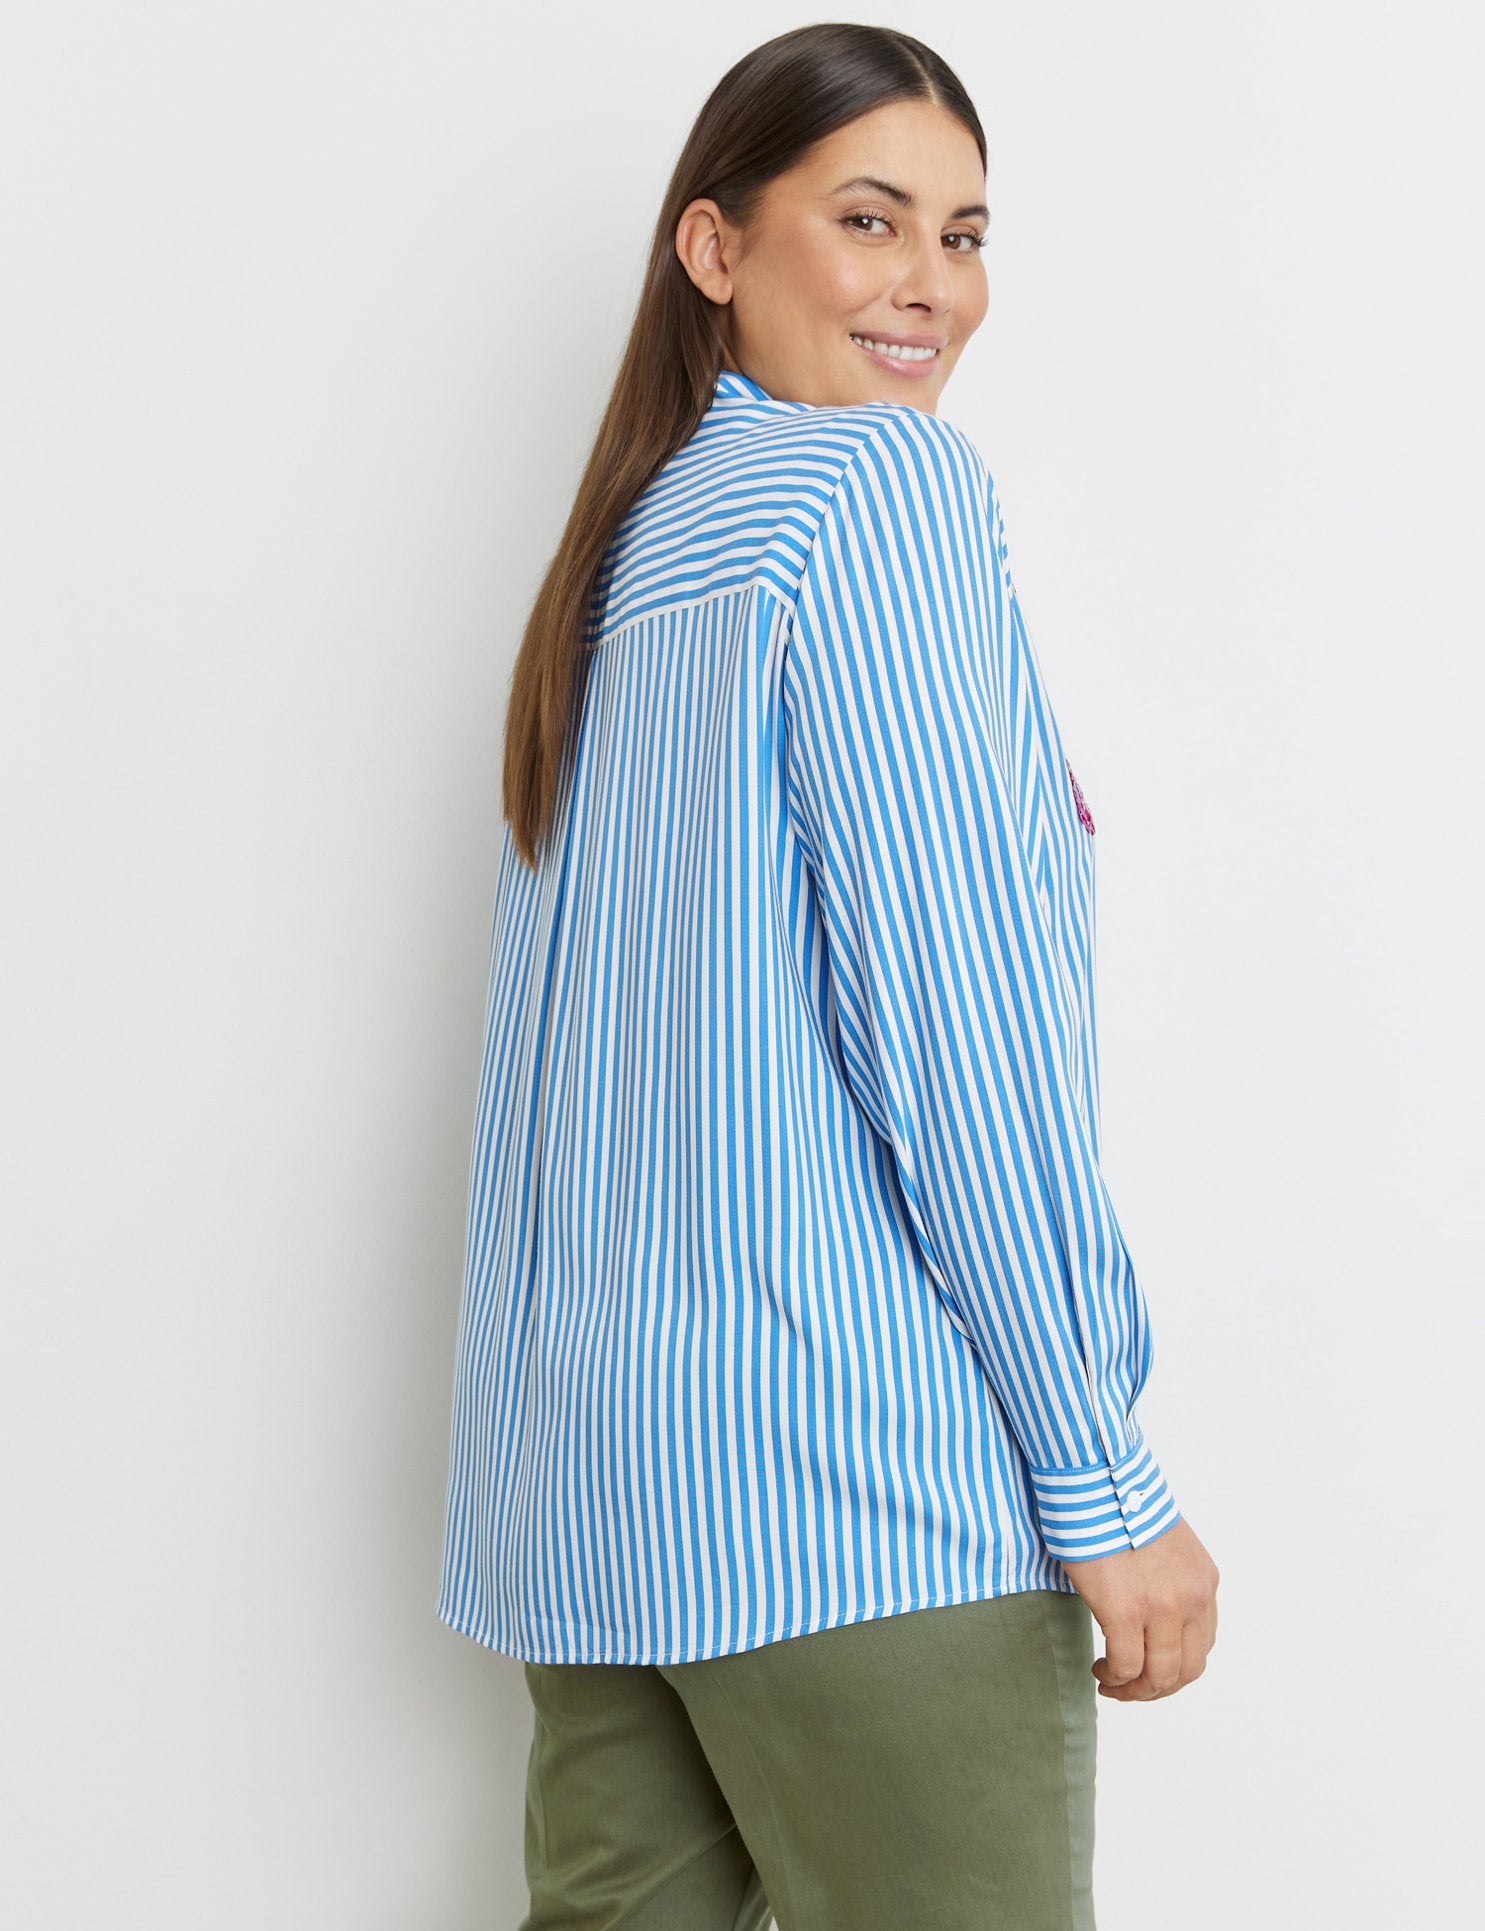 Striped Blouse With Sequin Embellishment_460001-21002_8822_06